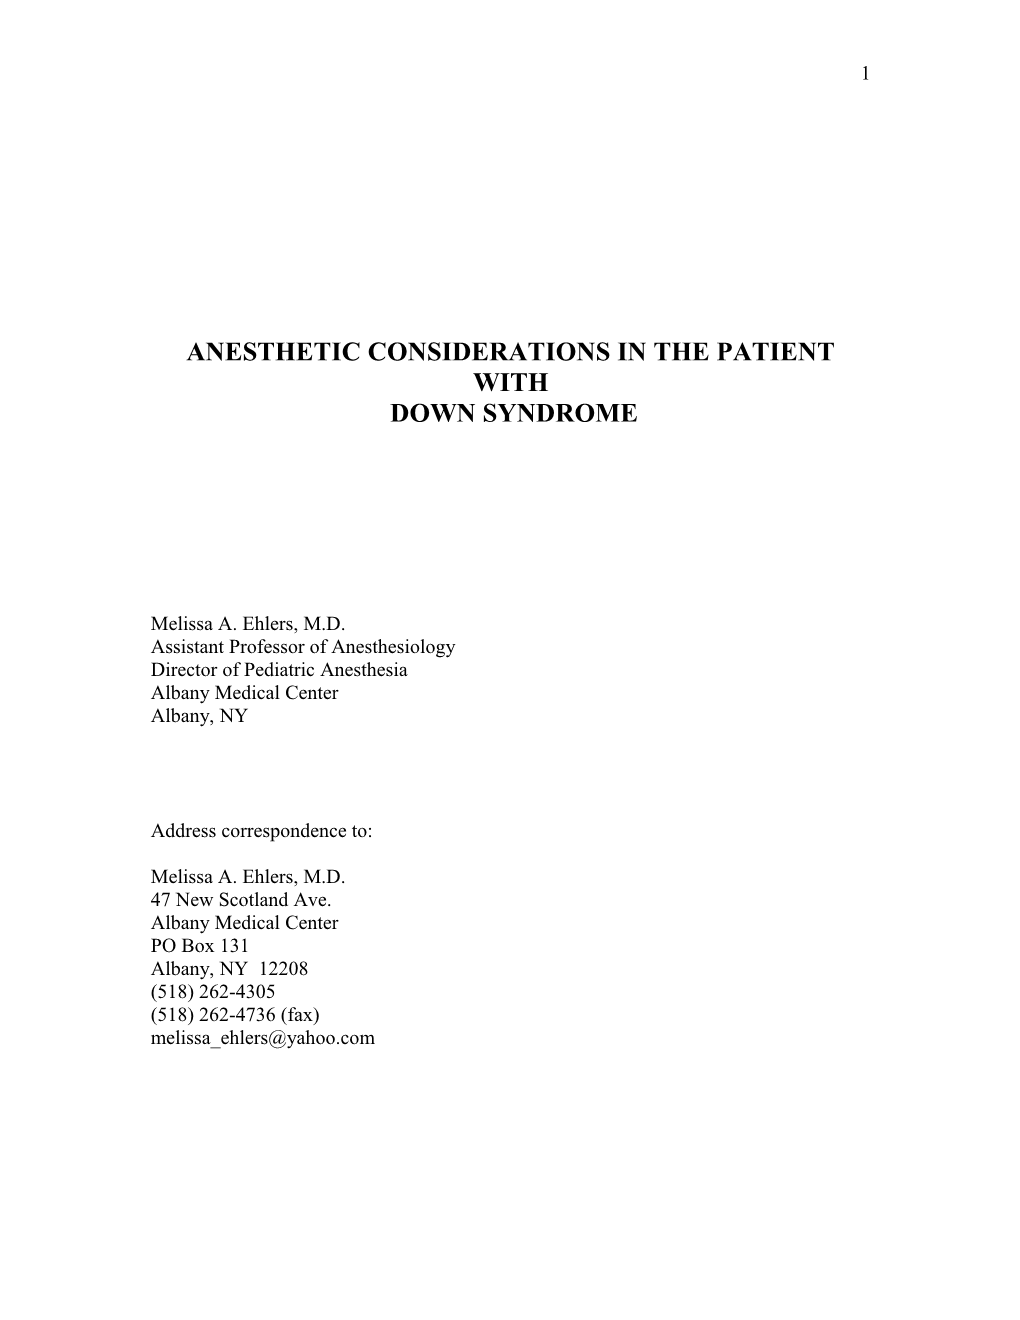 Anesthetic Considerations in the Patient With